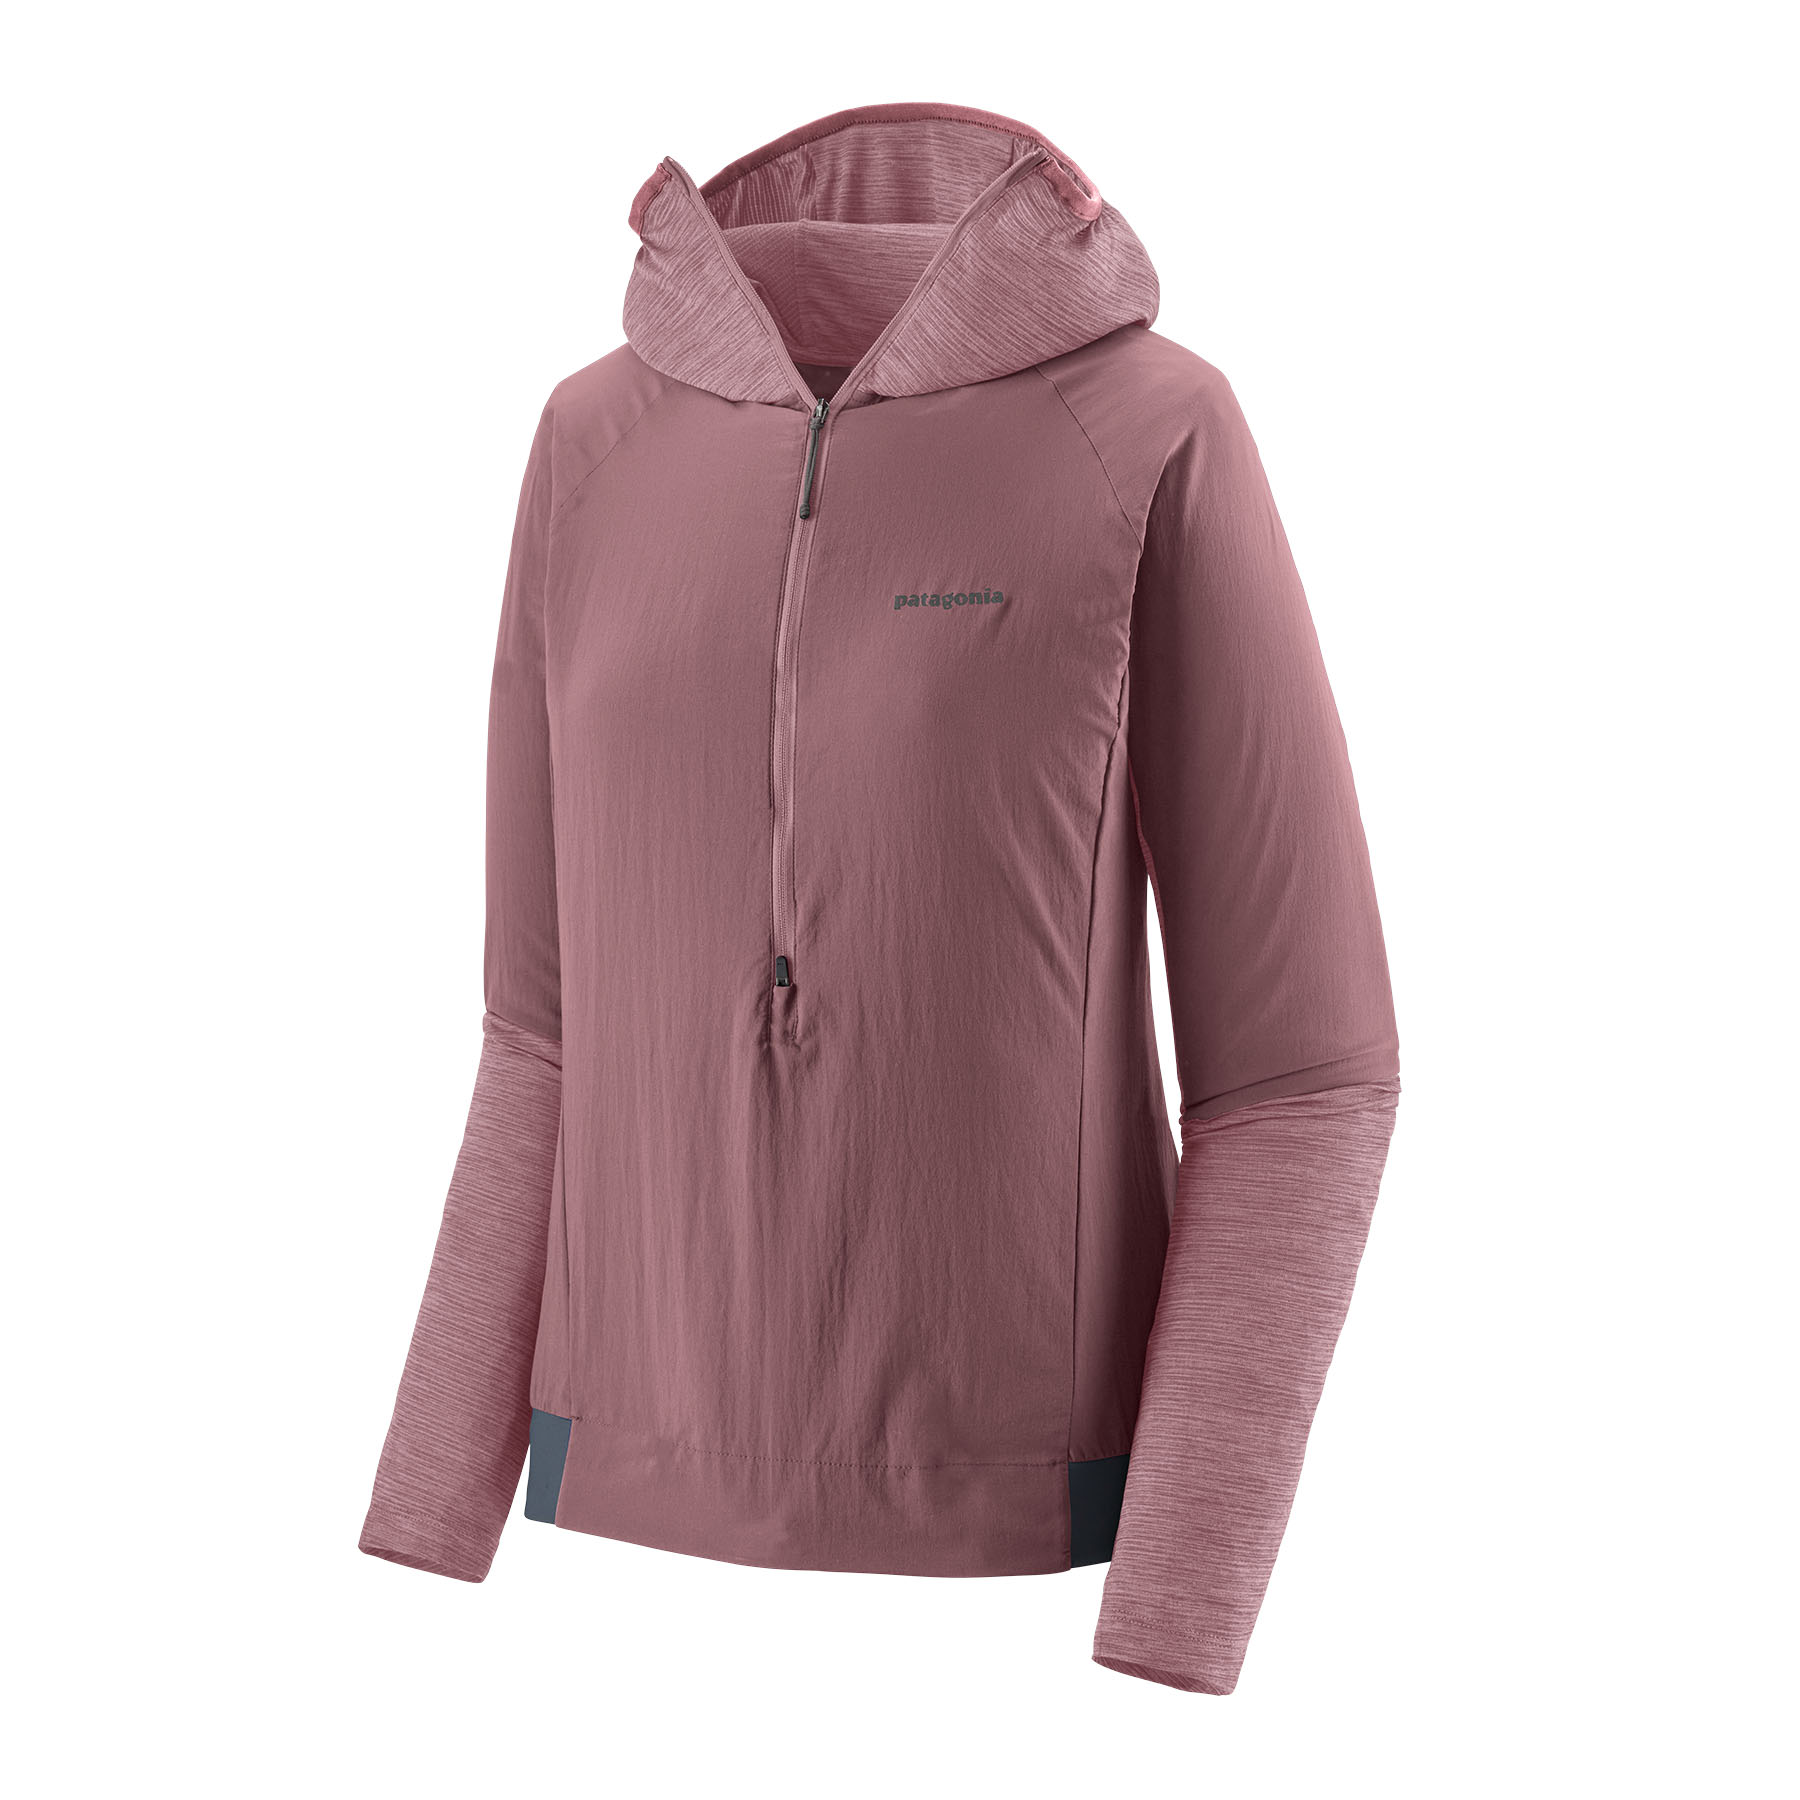 PATAGONIA Women's Airshed Pro Pullover EVMA